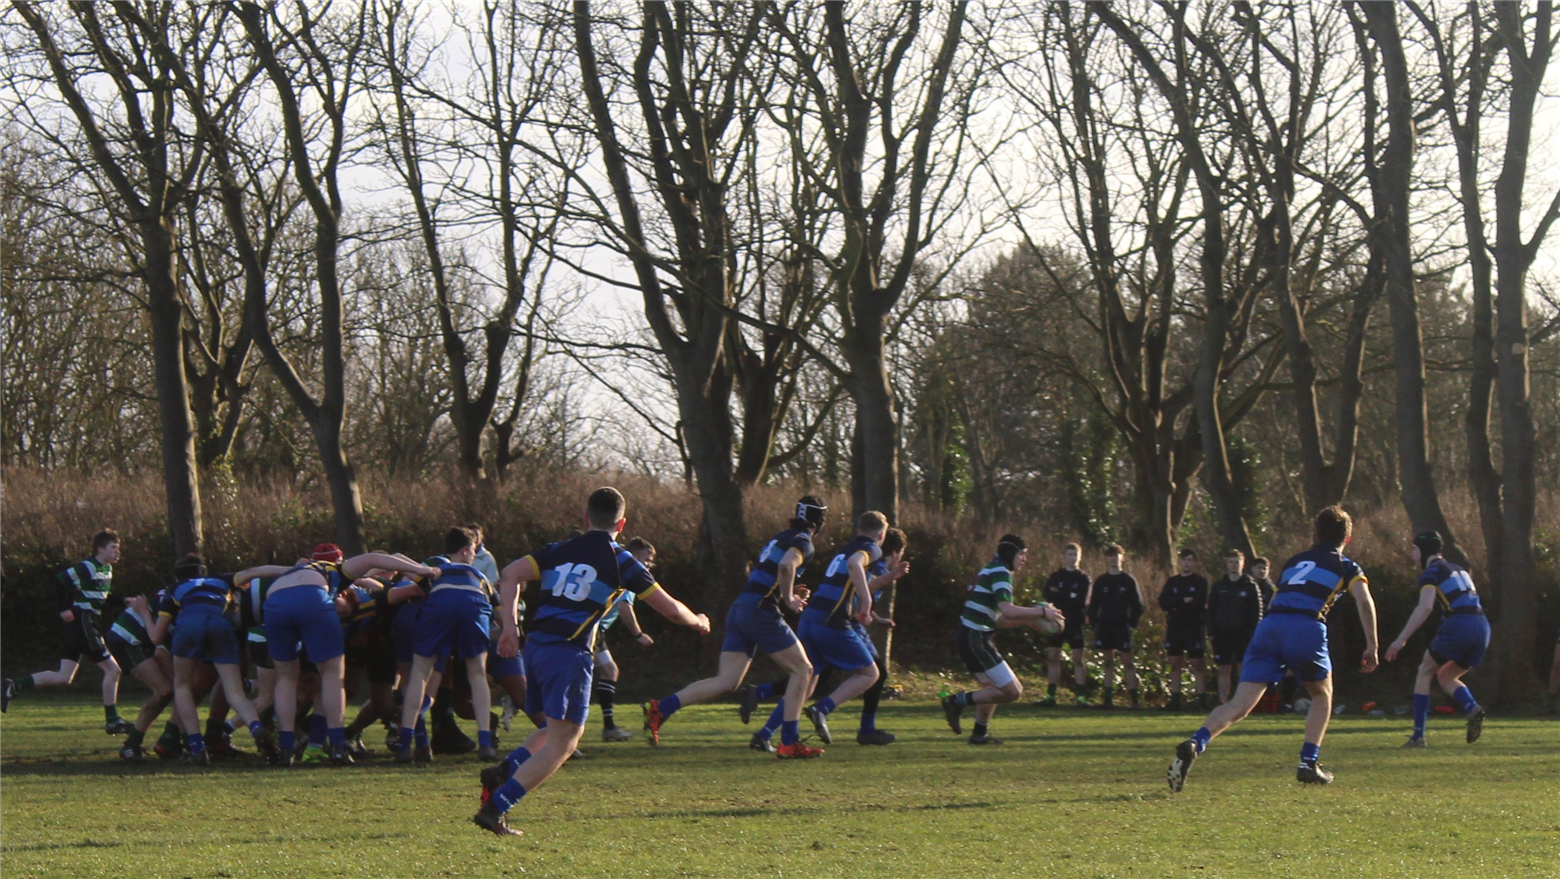 Lancashire Plate action for U15 and U16 rugby squads - Mr Holmes